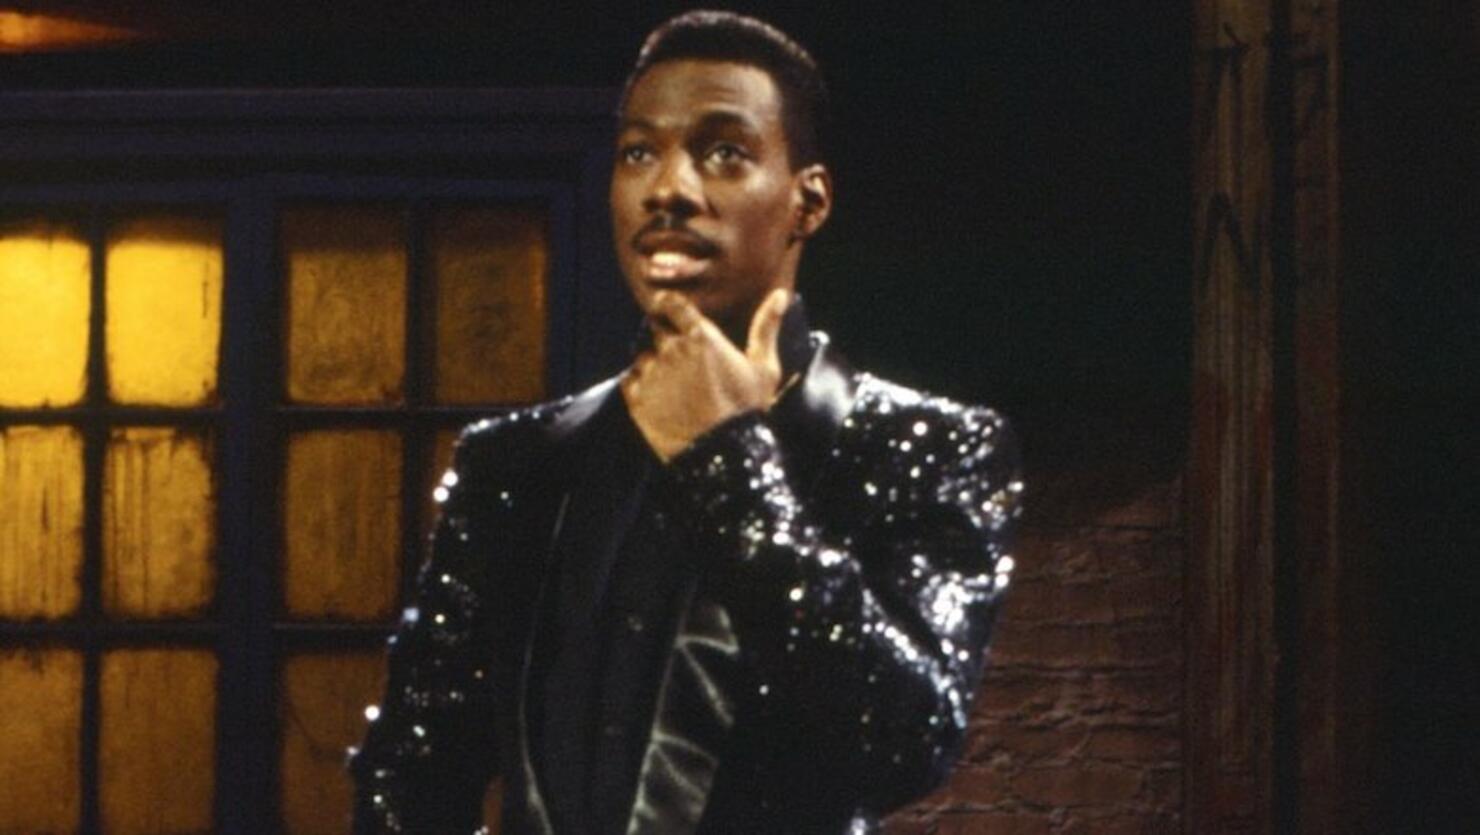 Eddie Murphy Returning To Host 'SNL' For The First Time In 35 Years